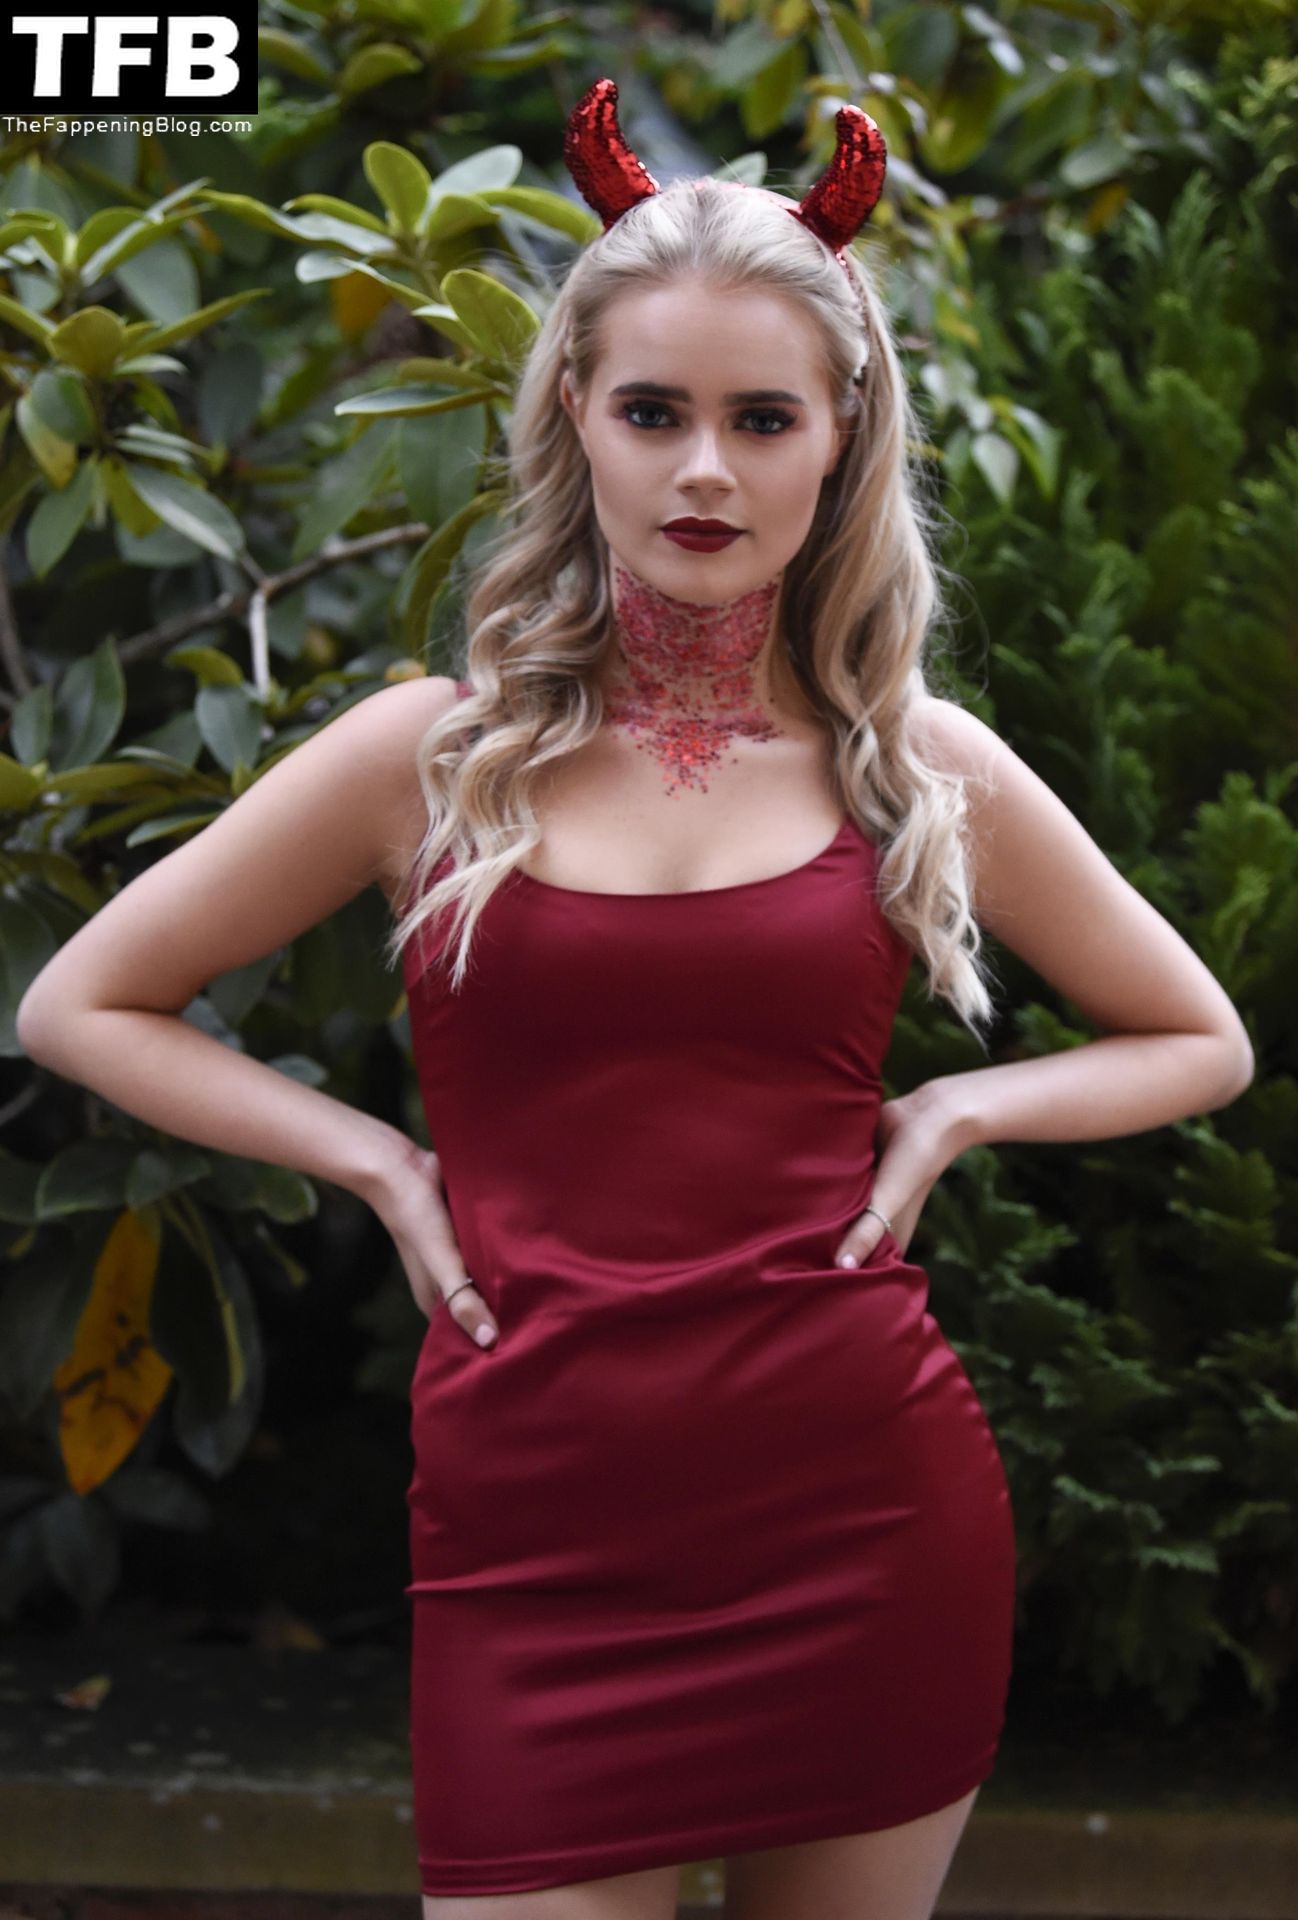 Lilly Sue McFadden Shows Off Her Amazing Figure In A Red Dress 20 Photos 4273 